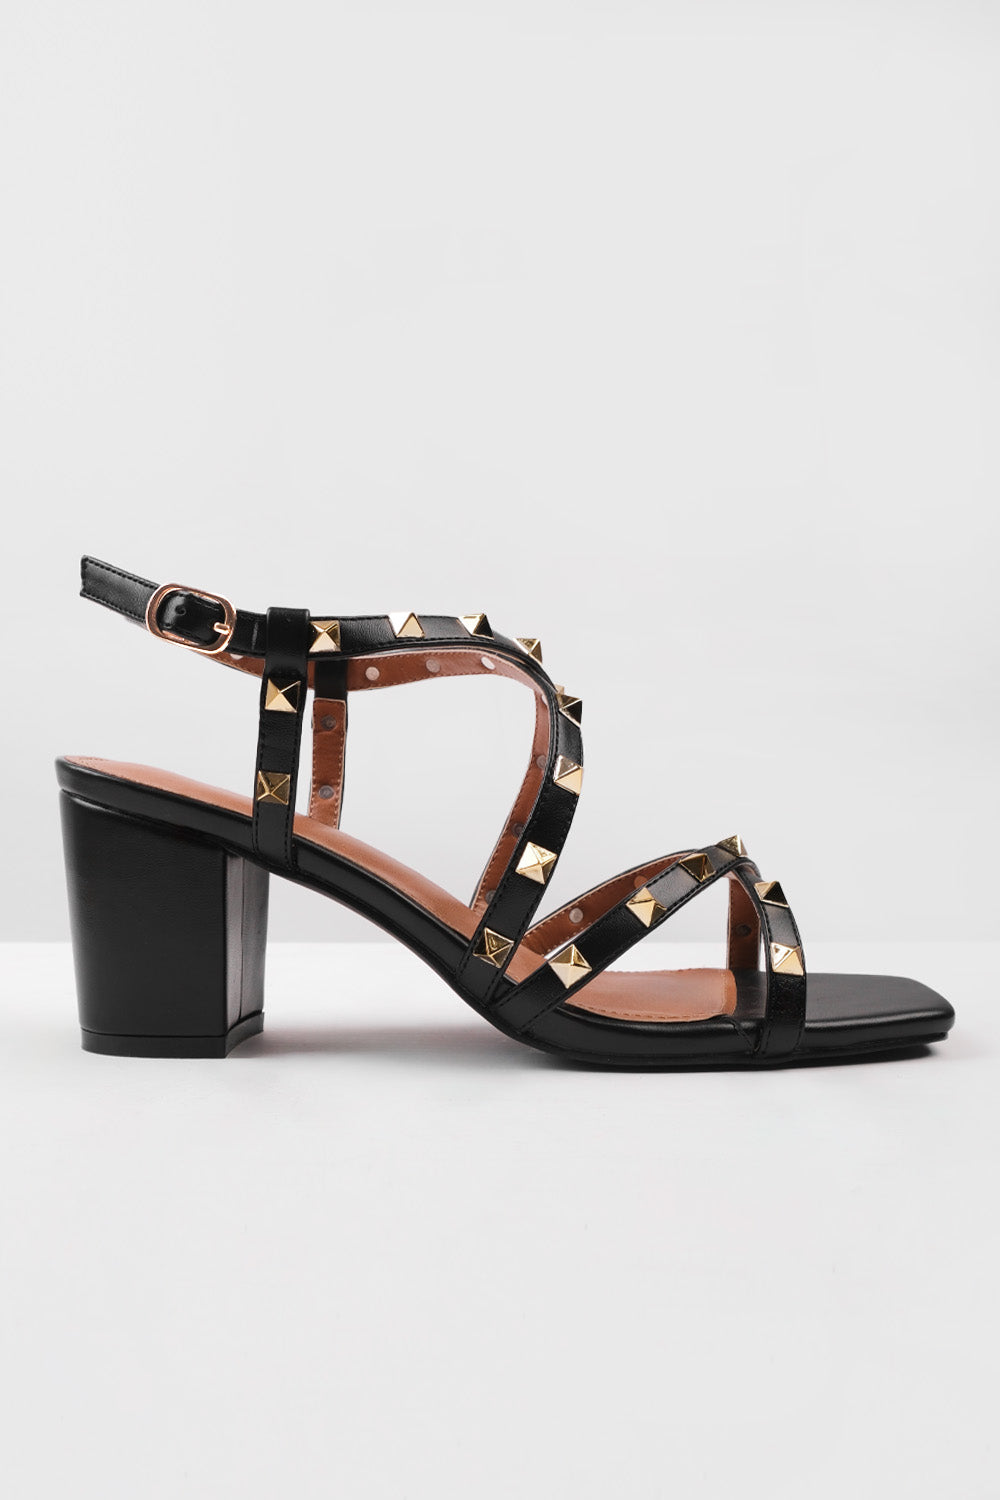 INTENSE STRAPPY BLOCK HEEL SANDALS WITH STUD DETAIL IN BLACK FAUX LEATHER